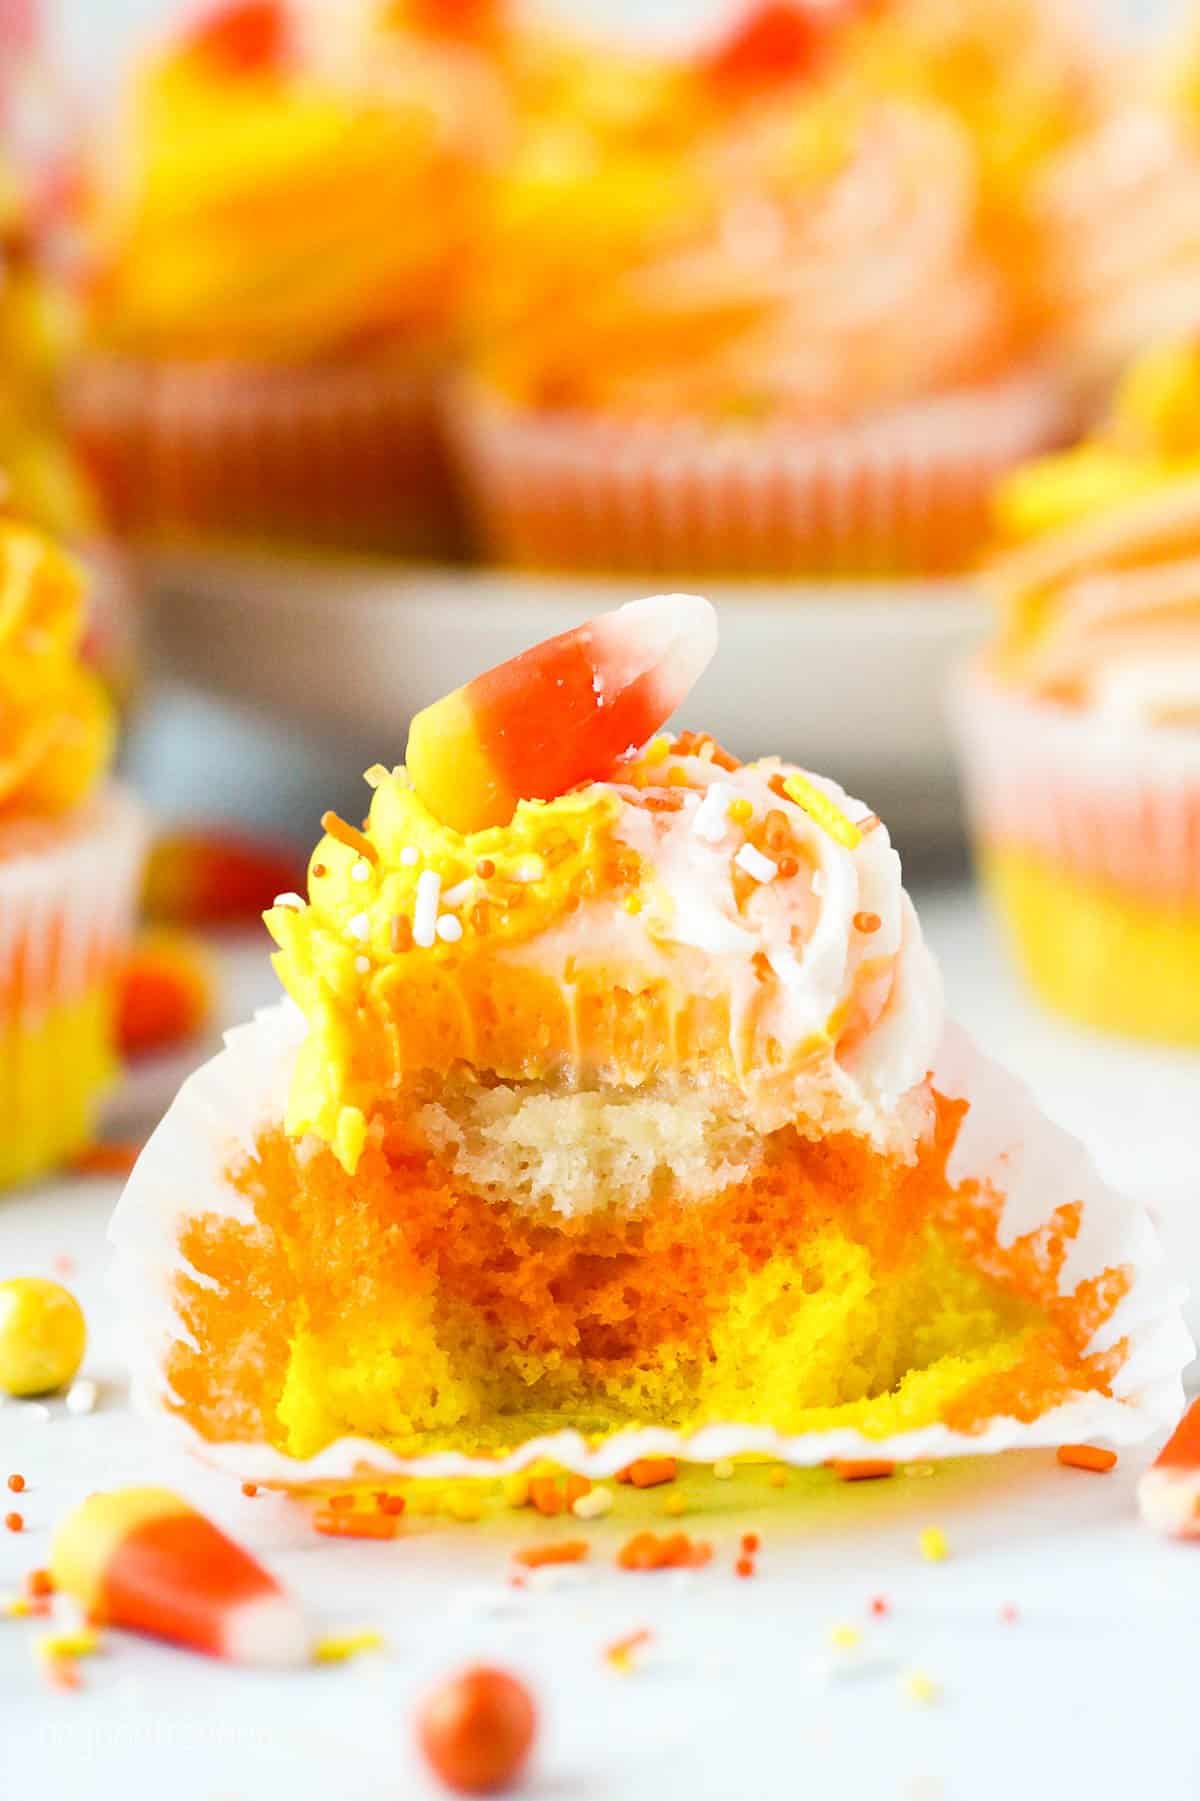 A yellow, orange and white cupcake with a bite taken out of it